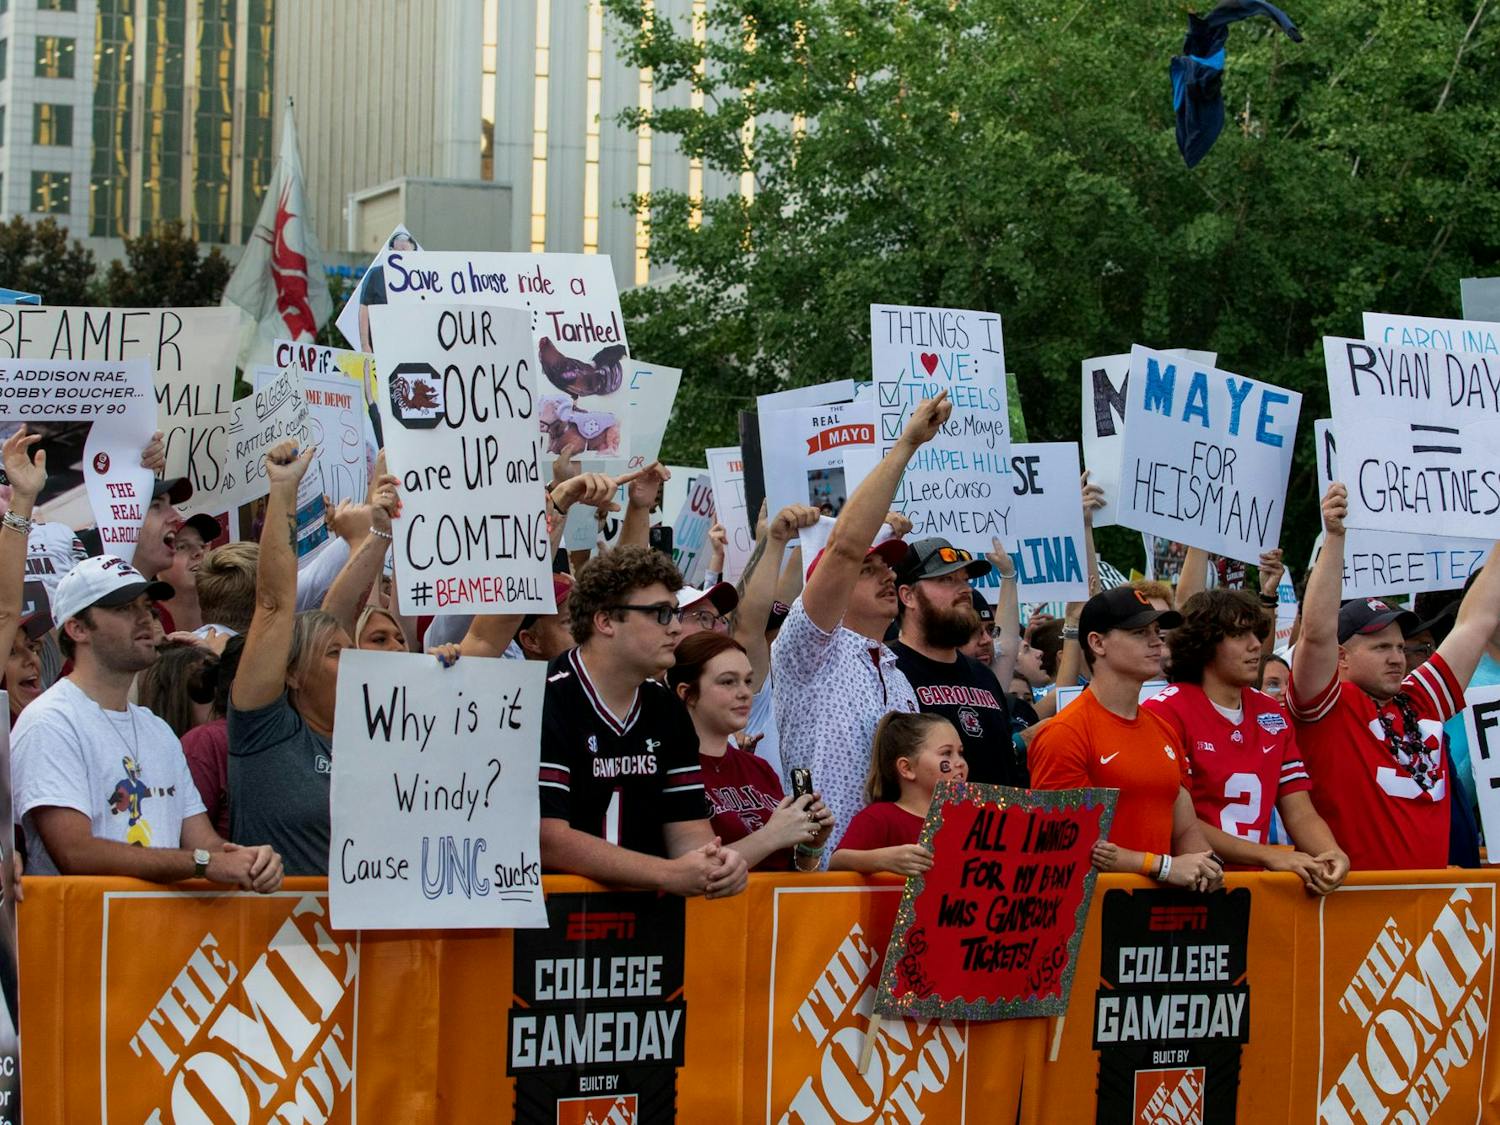 A mix of South Carolina and North Carolina fans in the front row for College GameDay. Fans from both sides brought signs supporting their team with the hope of being featured on the ESPN broadcast.